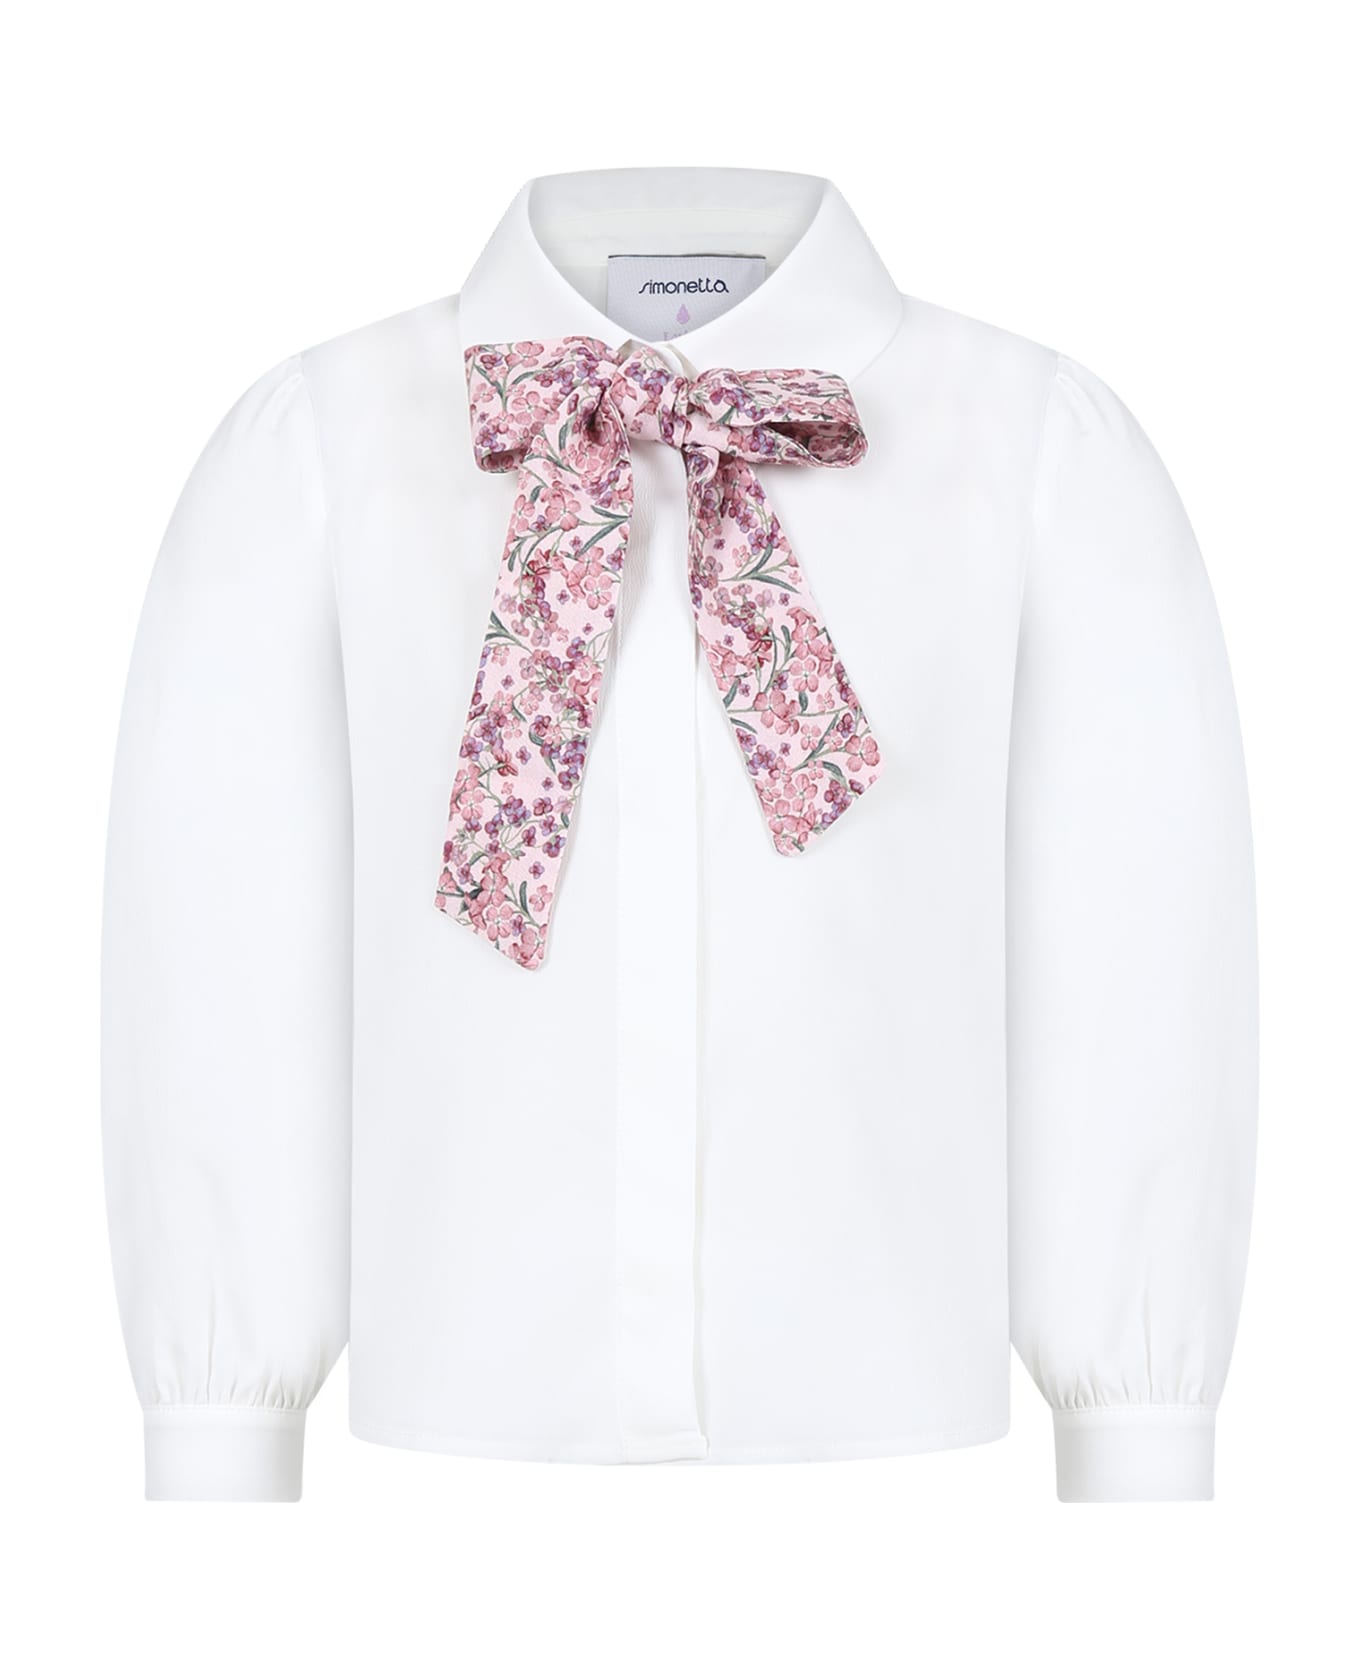 Simonetta White Shirt For Girl With Bow - ivory/pink シャツ